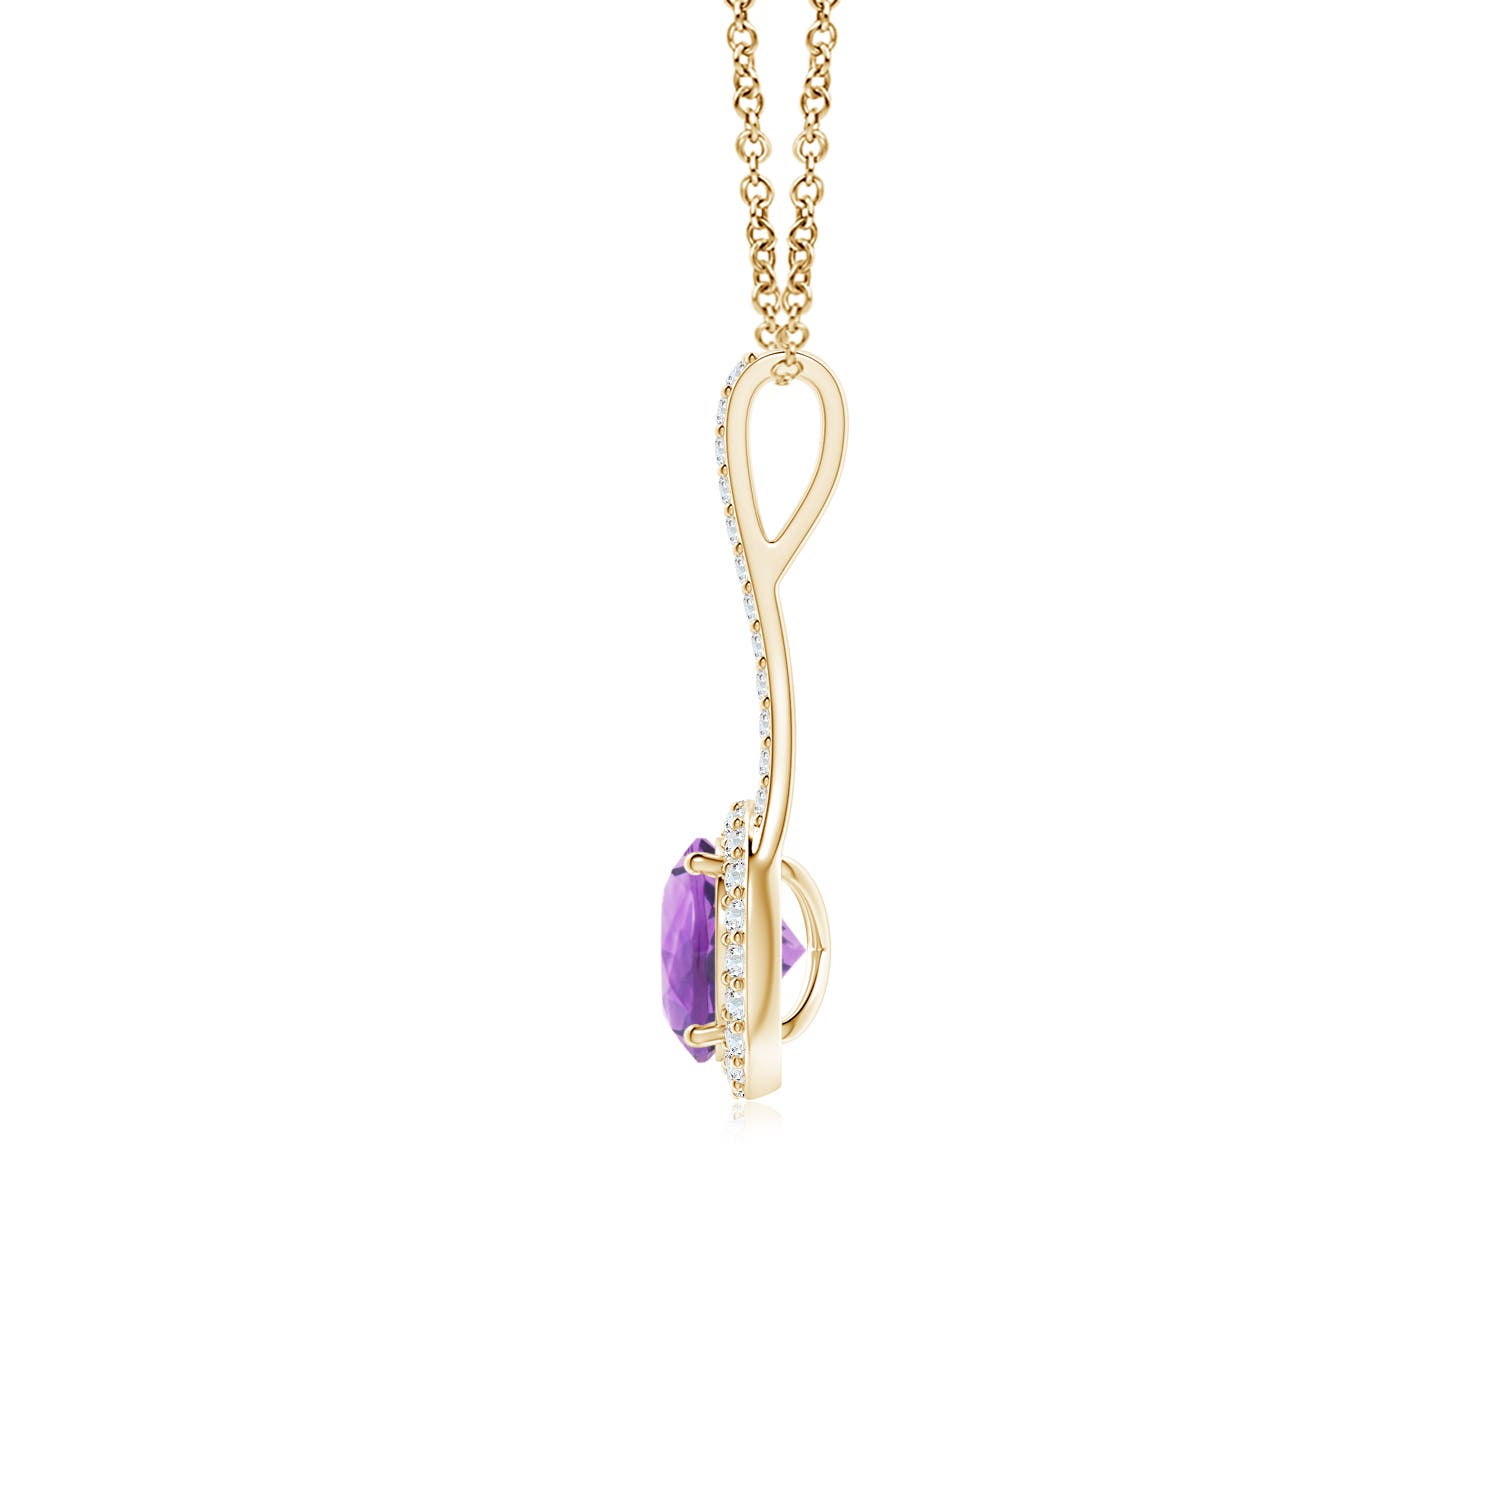 A - Amethyst / 1.02 CT / 14 KT Yellow Gold